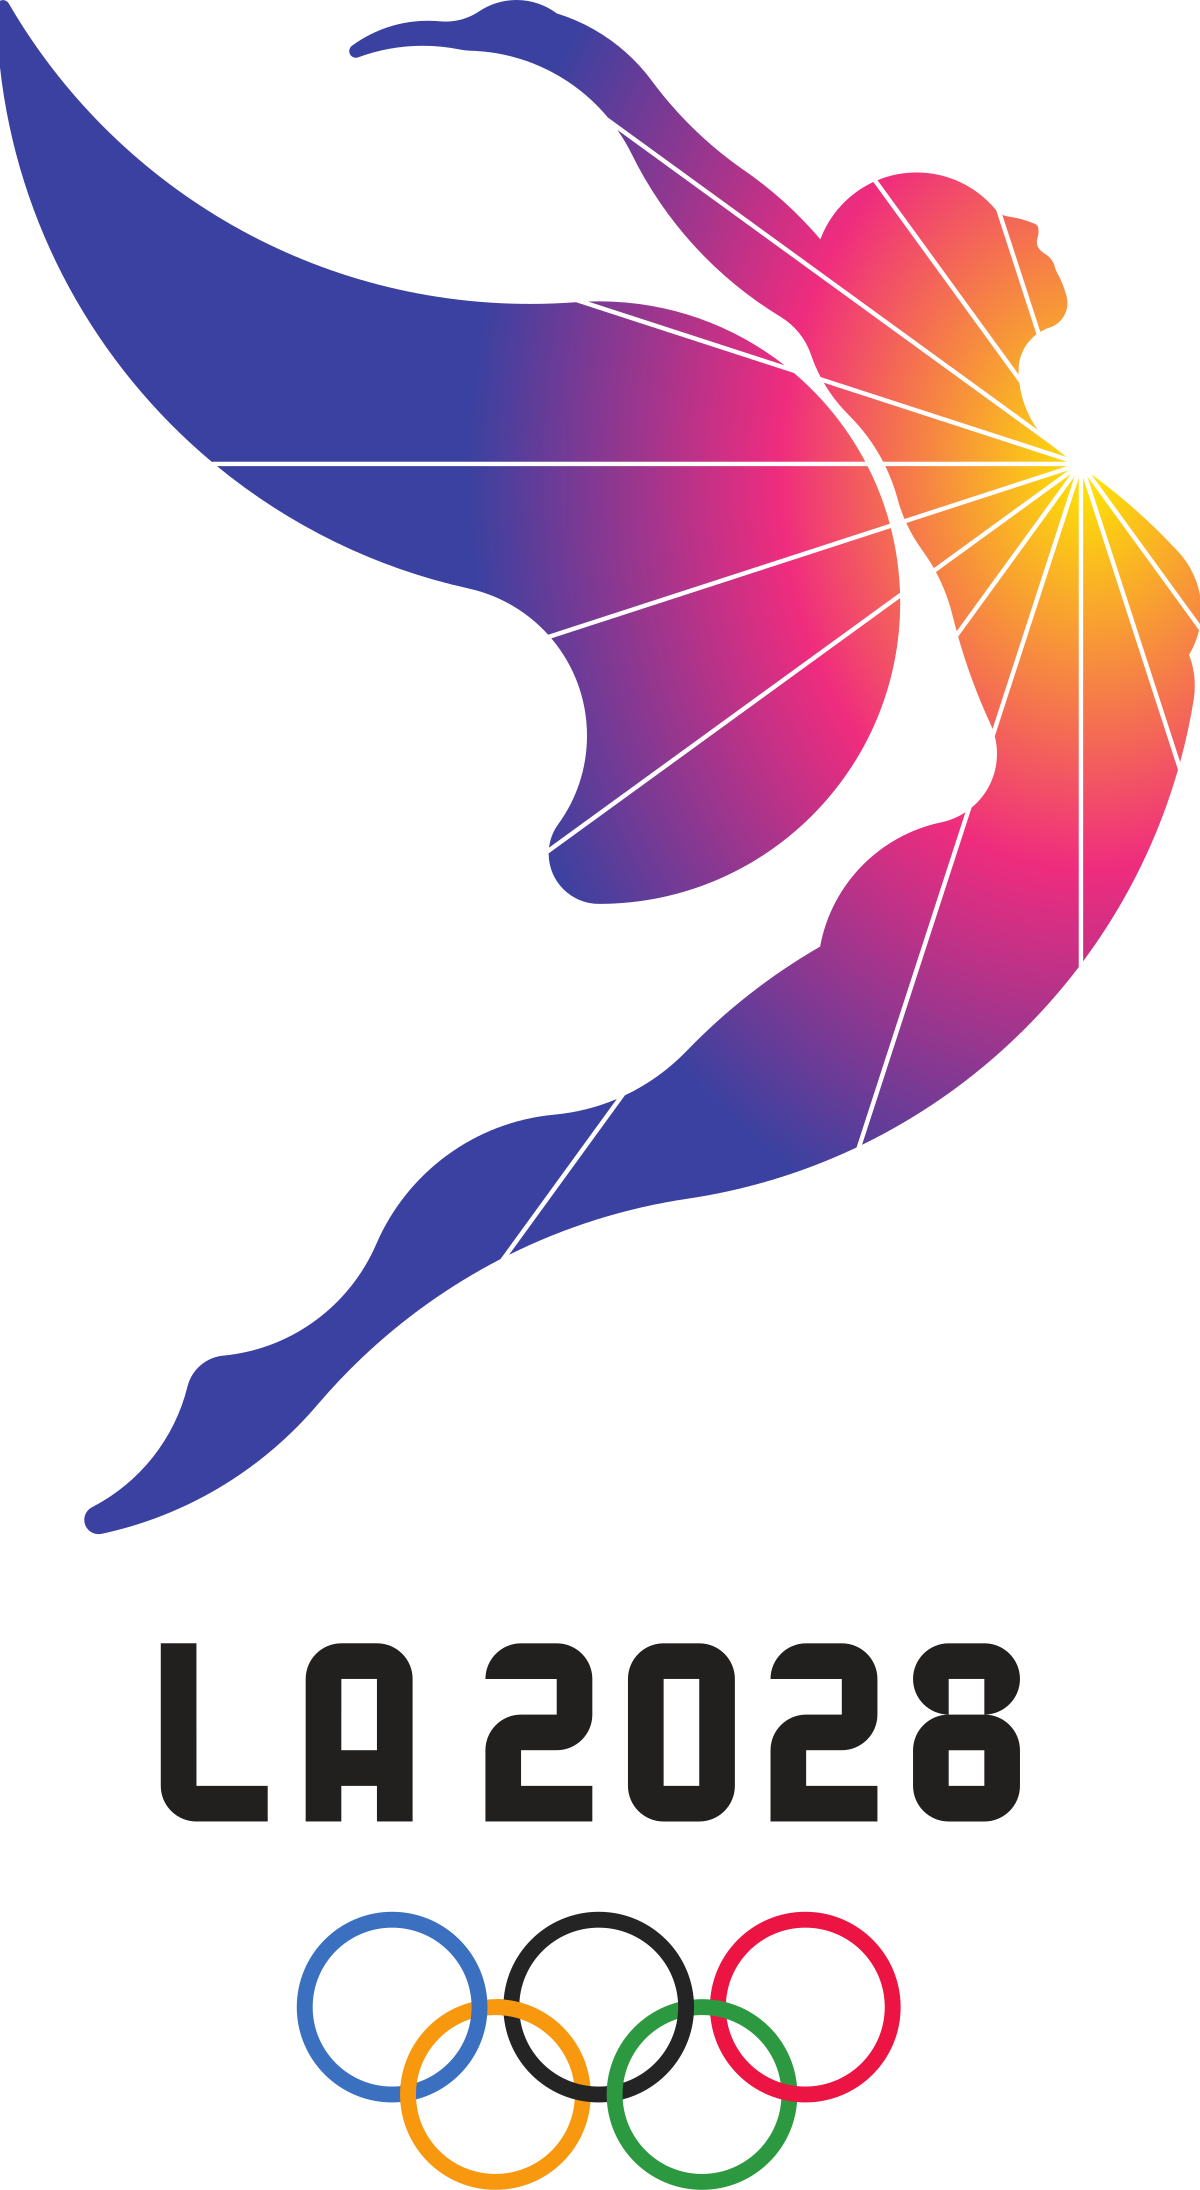 Los Angeles 2028 Olympic Games logo